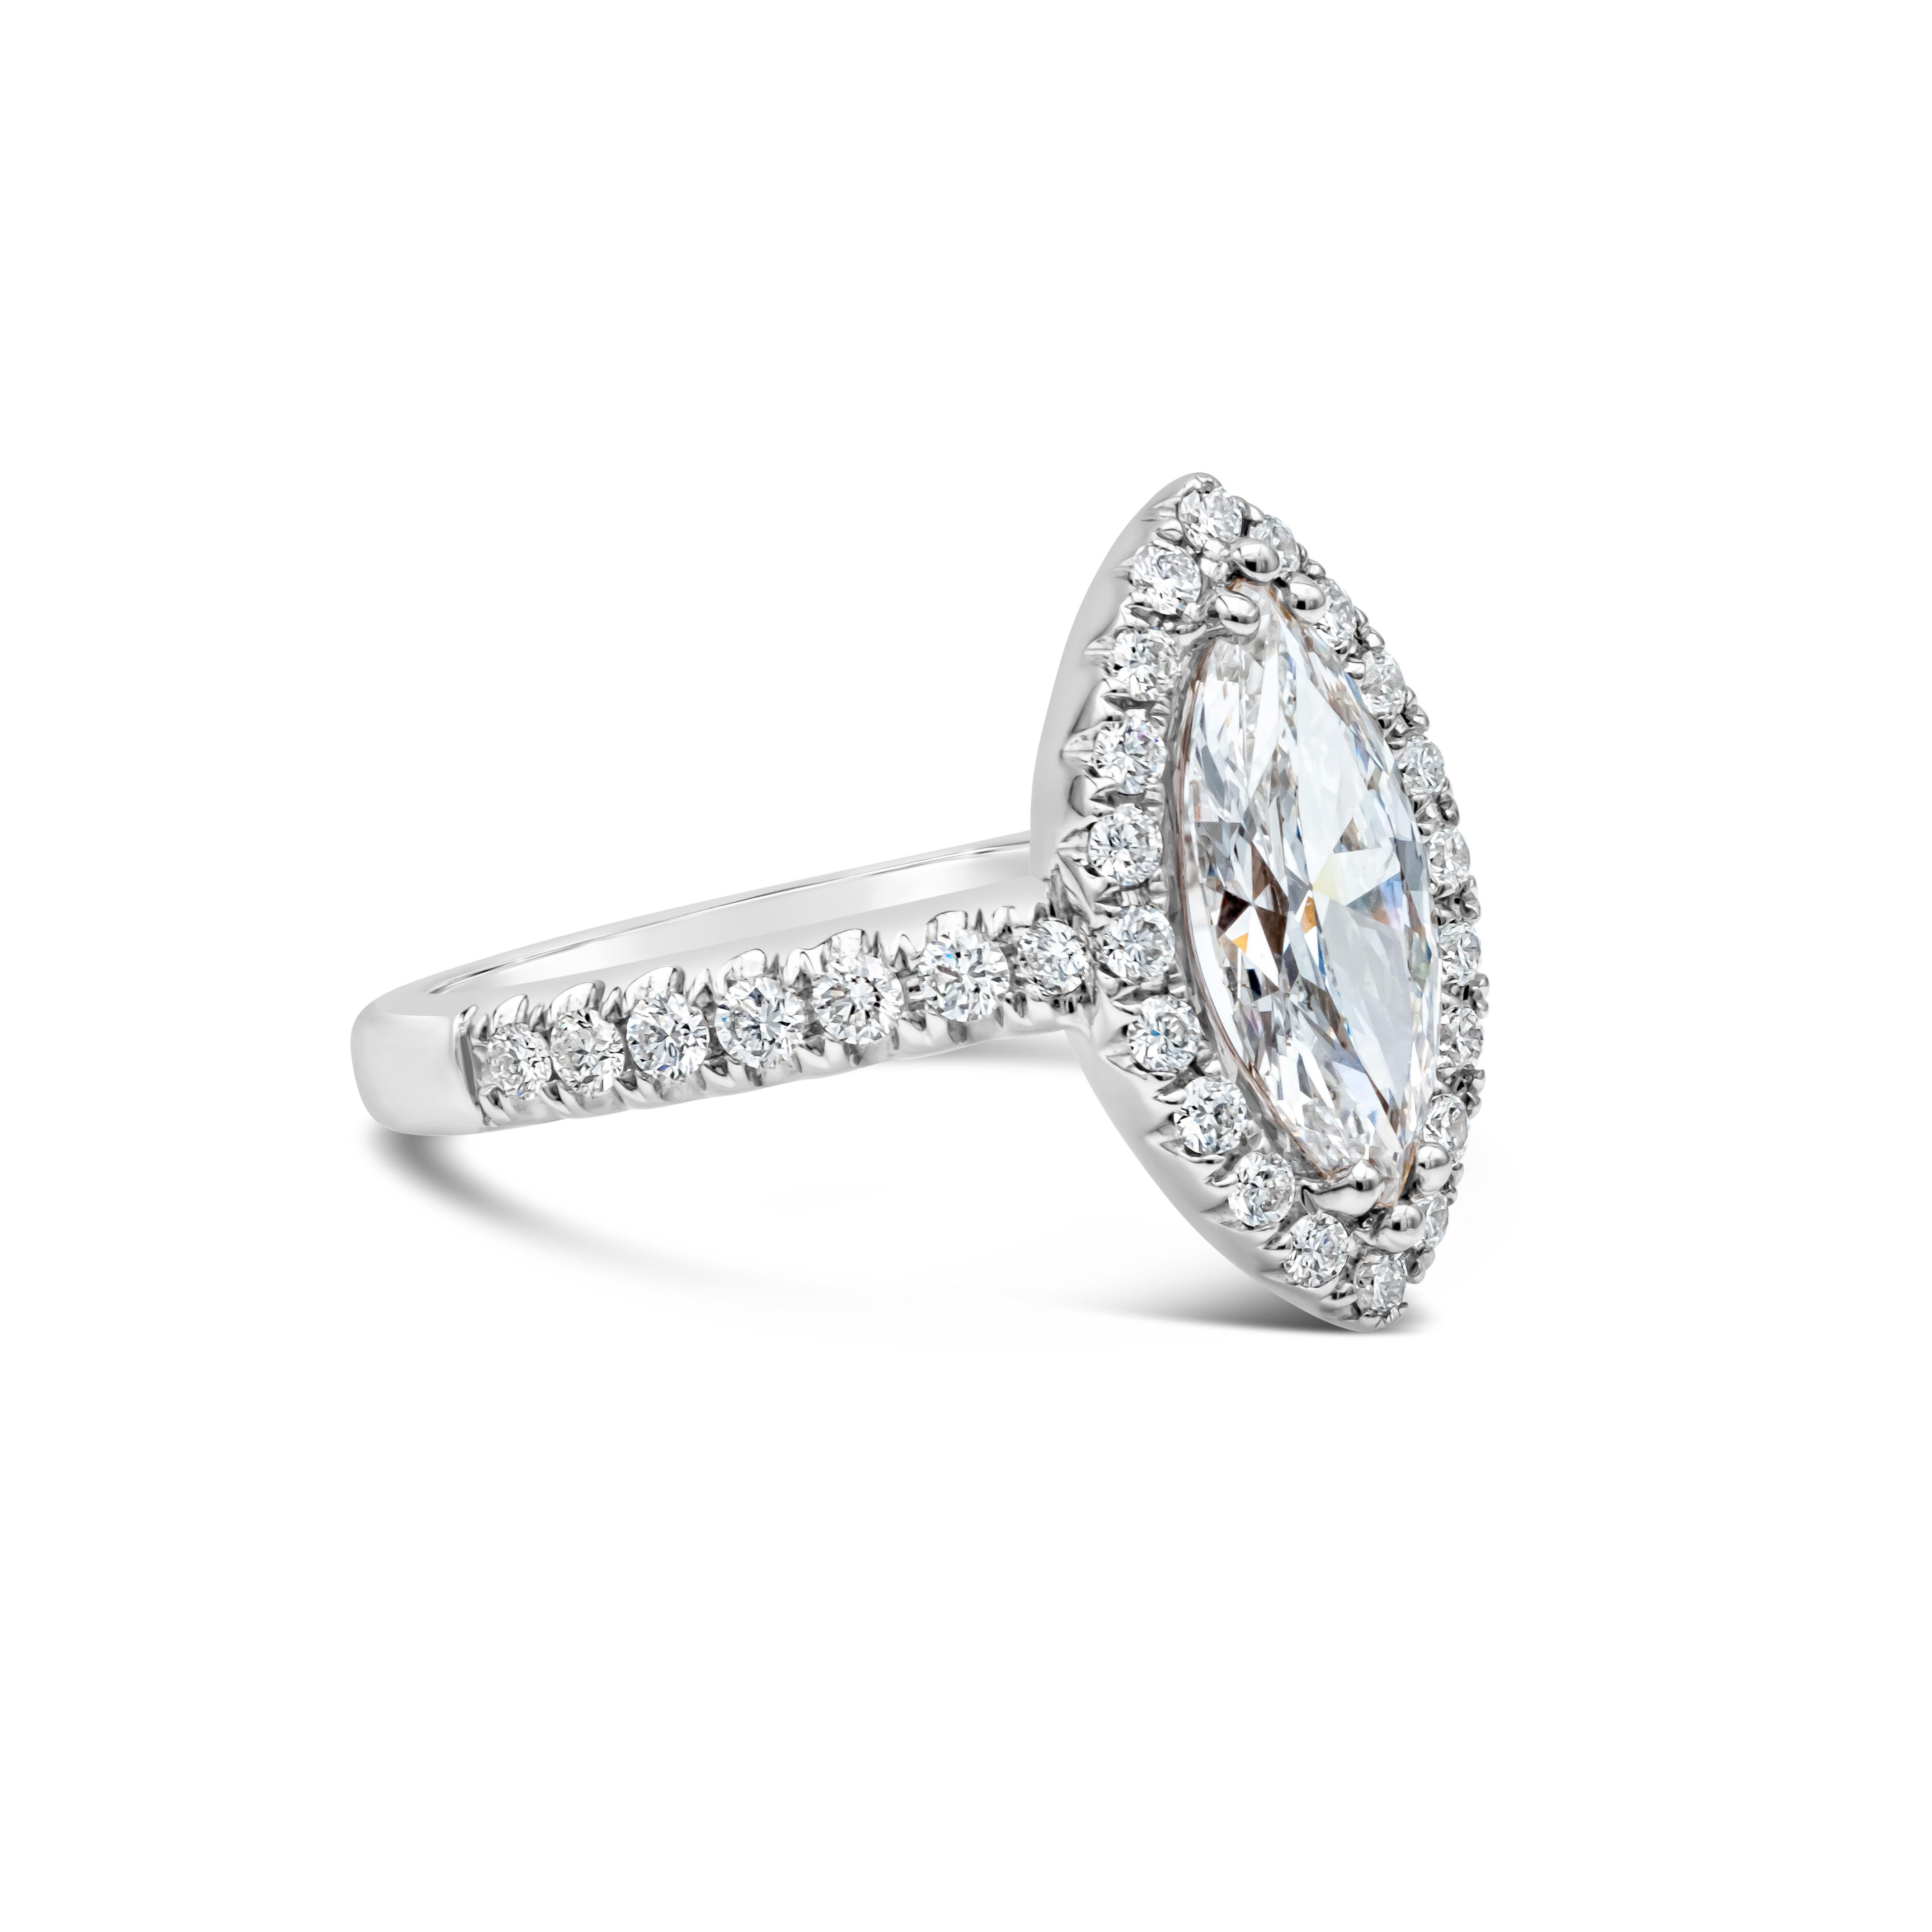 A unique engagement ring features a GIA Certified 1.26 carat marquise cut diamond, E Color and SI2 in Clarity. Accenting the center stone is a single row of brilliant round diamonds in halo setting.  Shank made in 18K White Gold is encrusted with